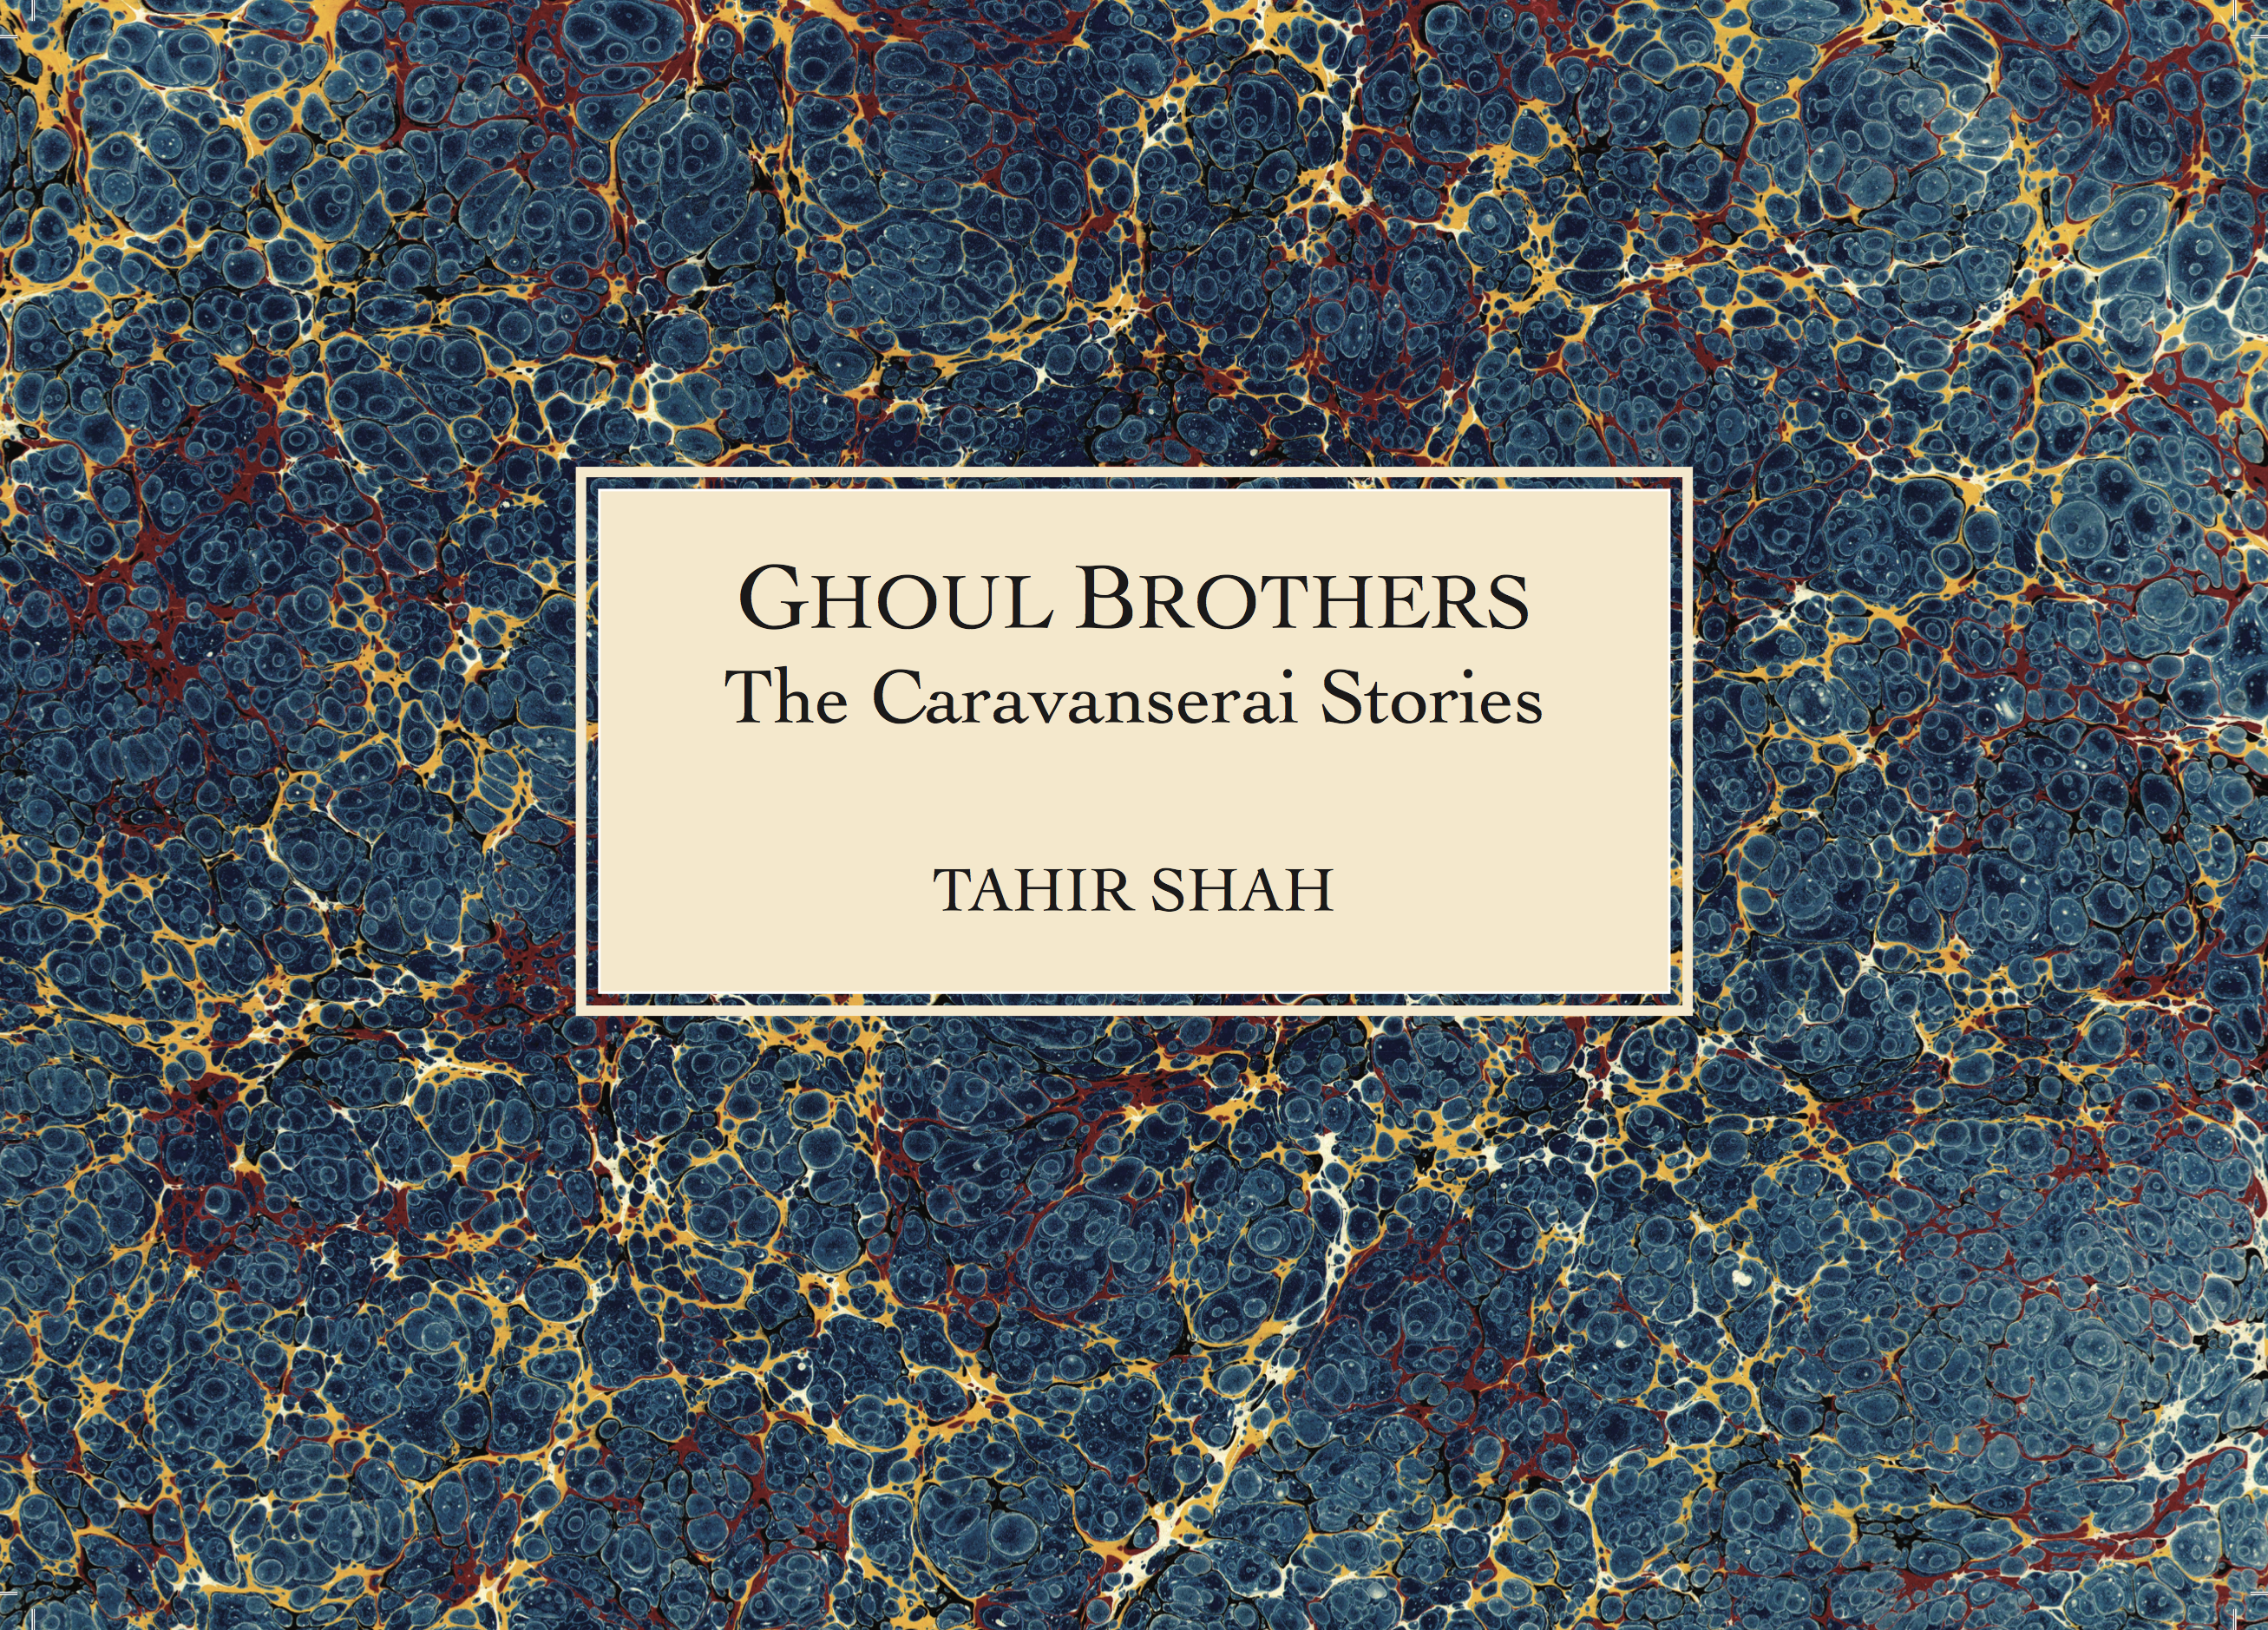 GHOUL BROTHERS